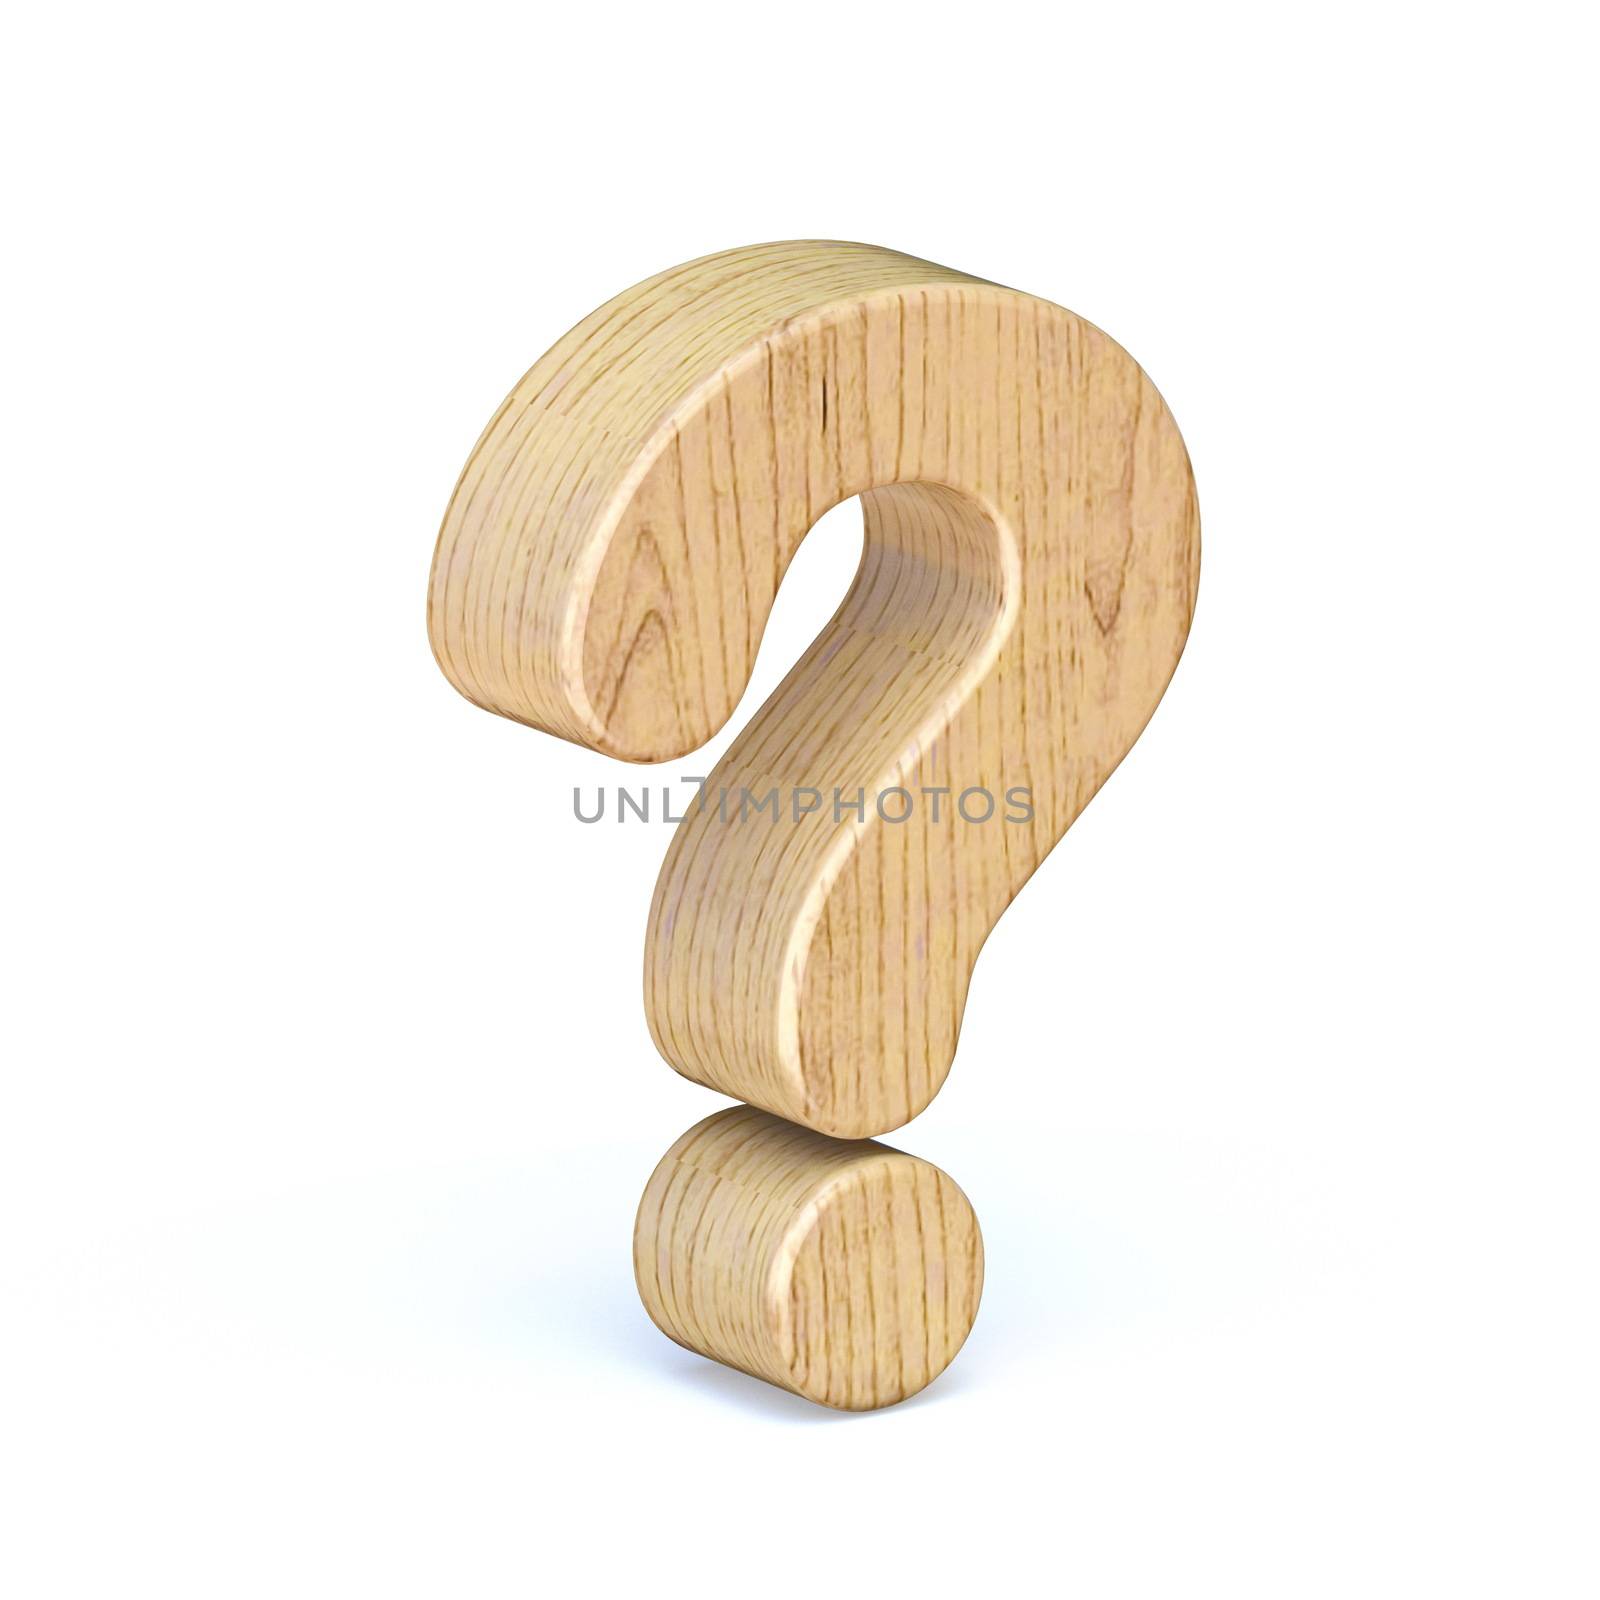 Rounded wooden font question mark 3D by djmilic